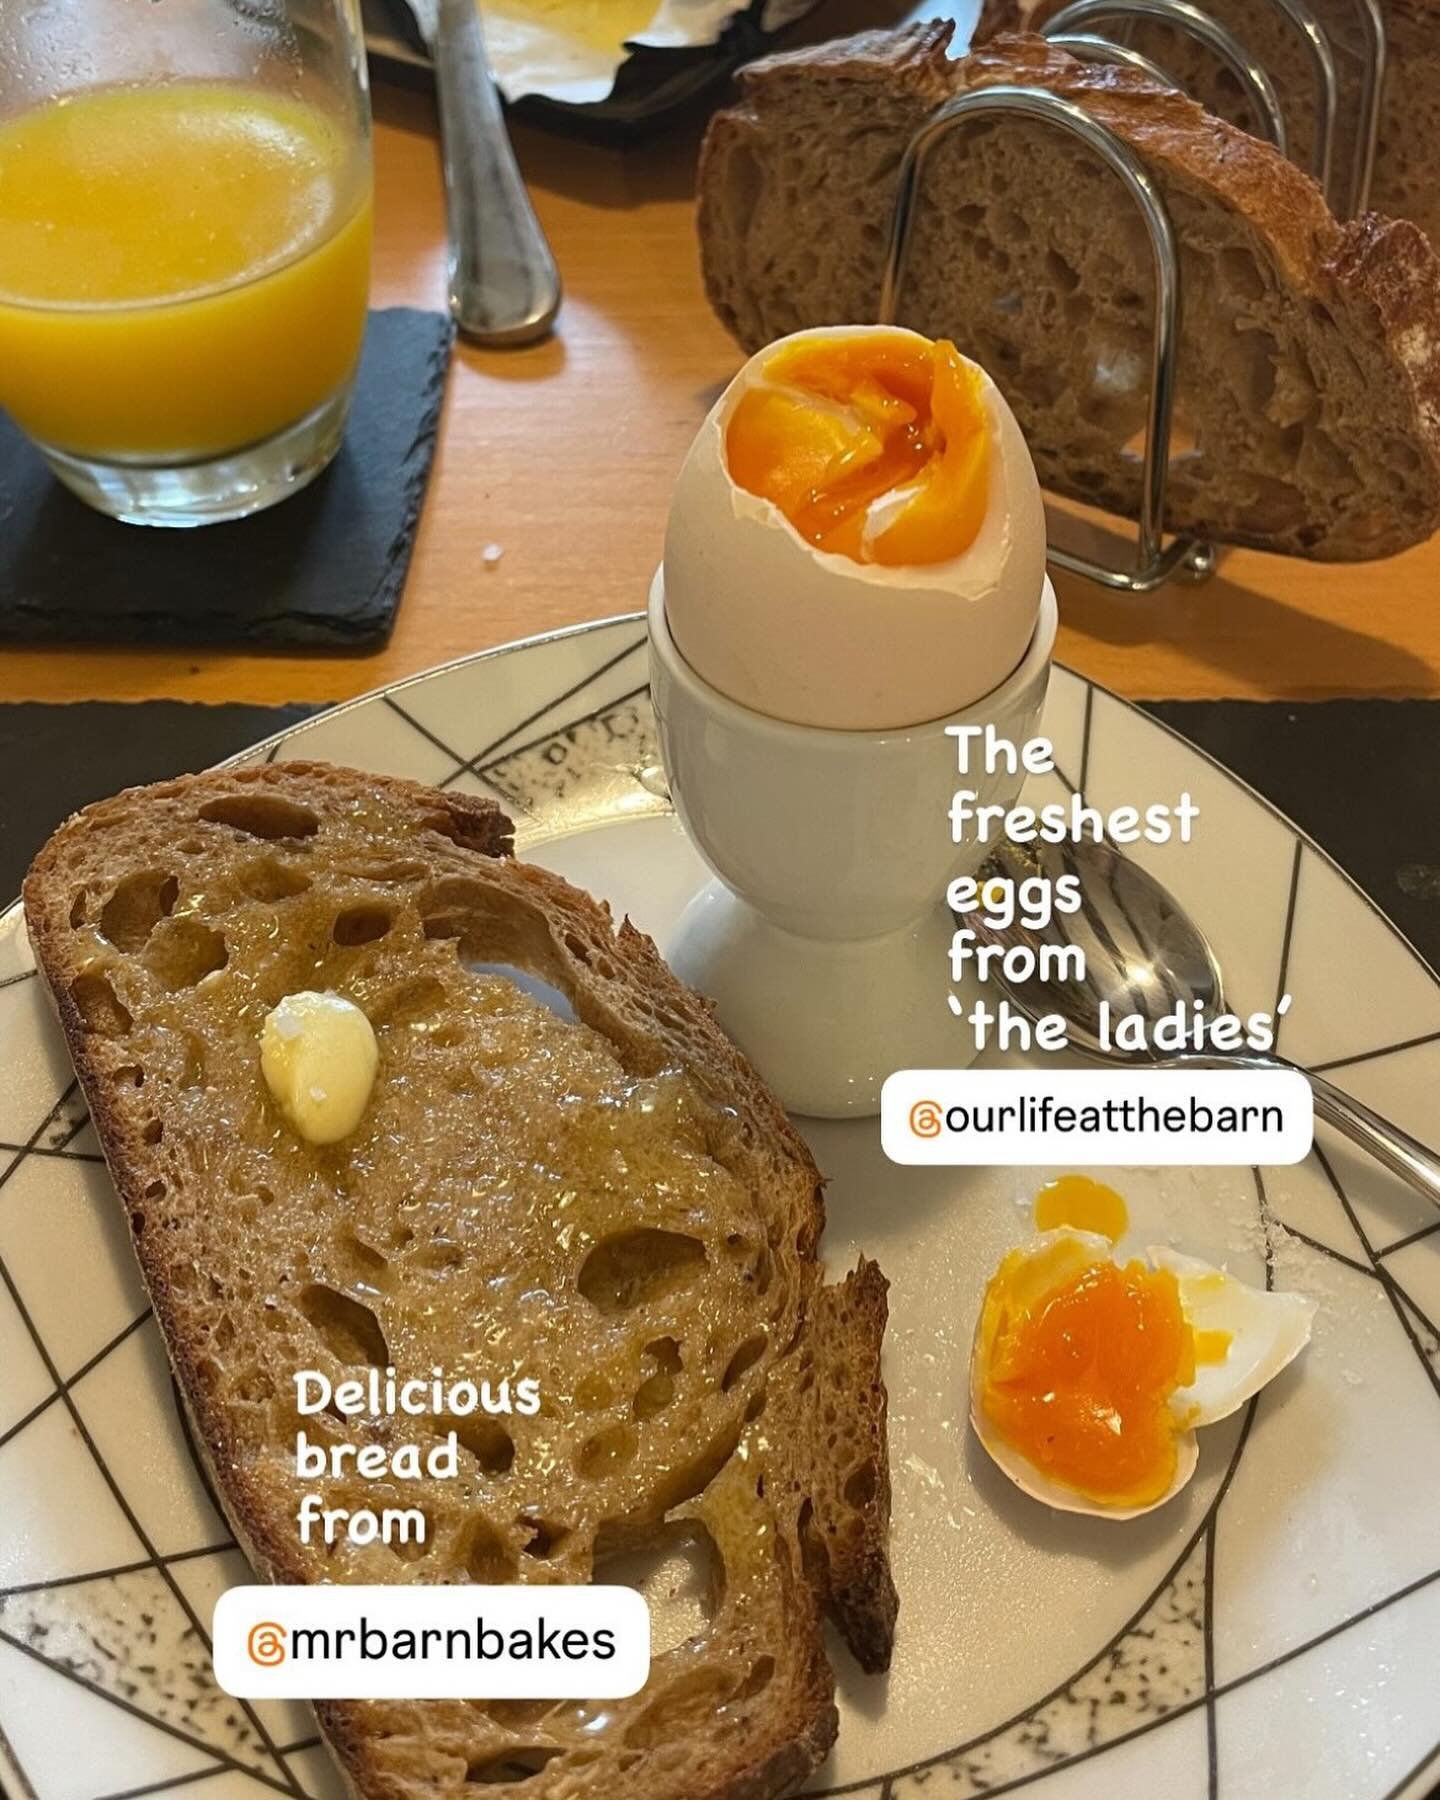 Our guests @becks_on_the_beach enjoying the freshest Sourdough &amp; Eggs from our ladies during their stay! 
Stay tuned as we are launching are @ourlifeatthebarn Breakfast Hampers to enjoy during your stay! Full of local organic produce and of cours